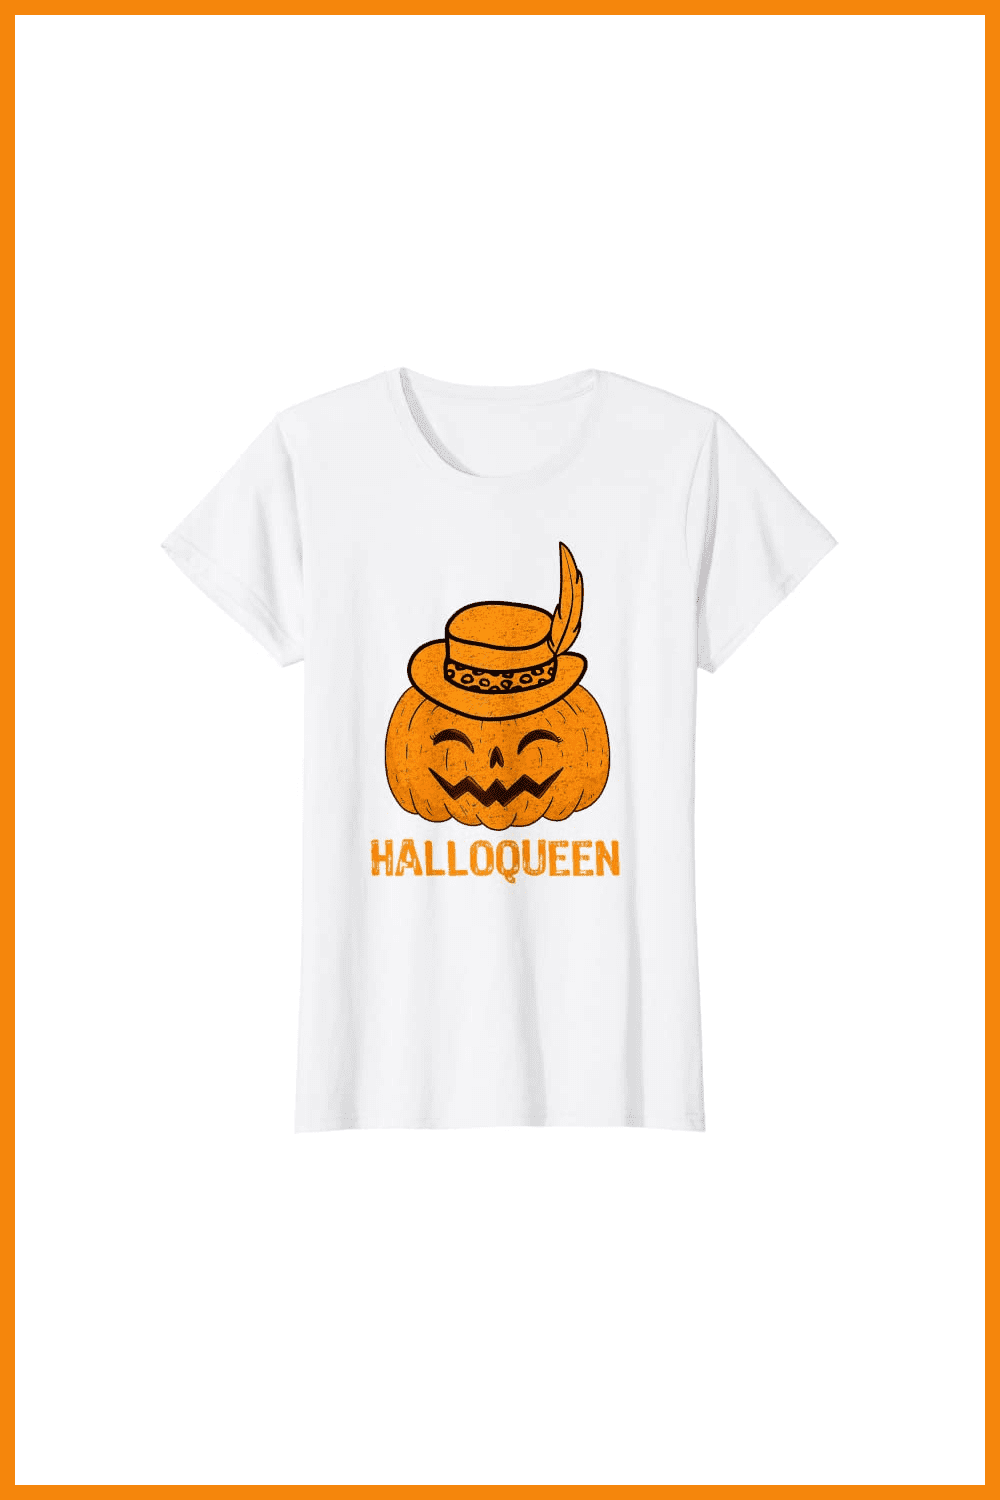 White t-shirt with a cute pumpkin in a hat with a feather.